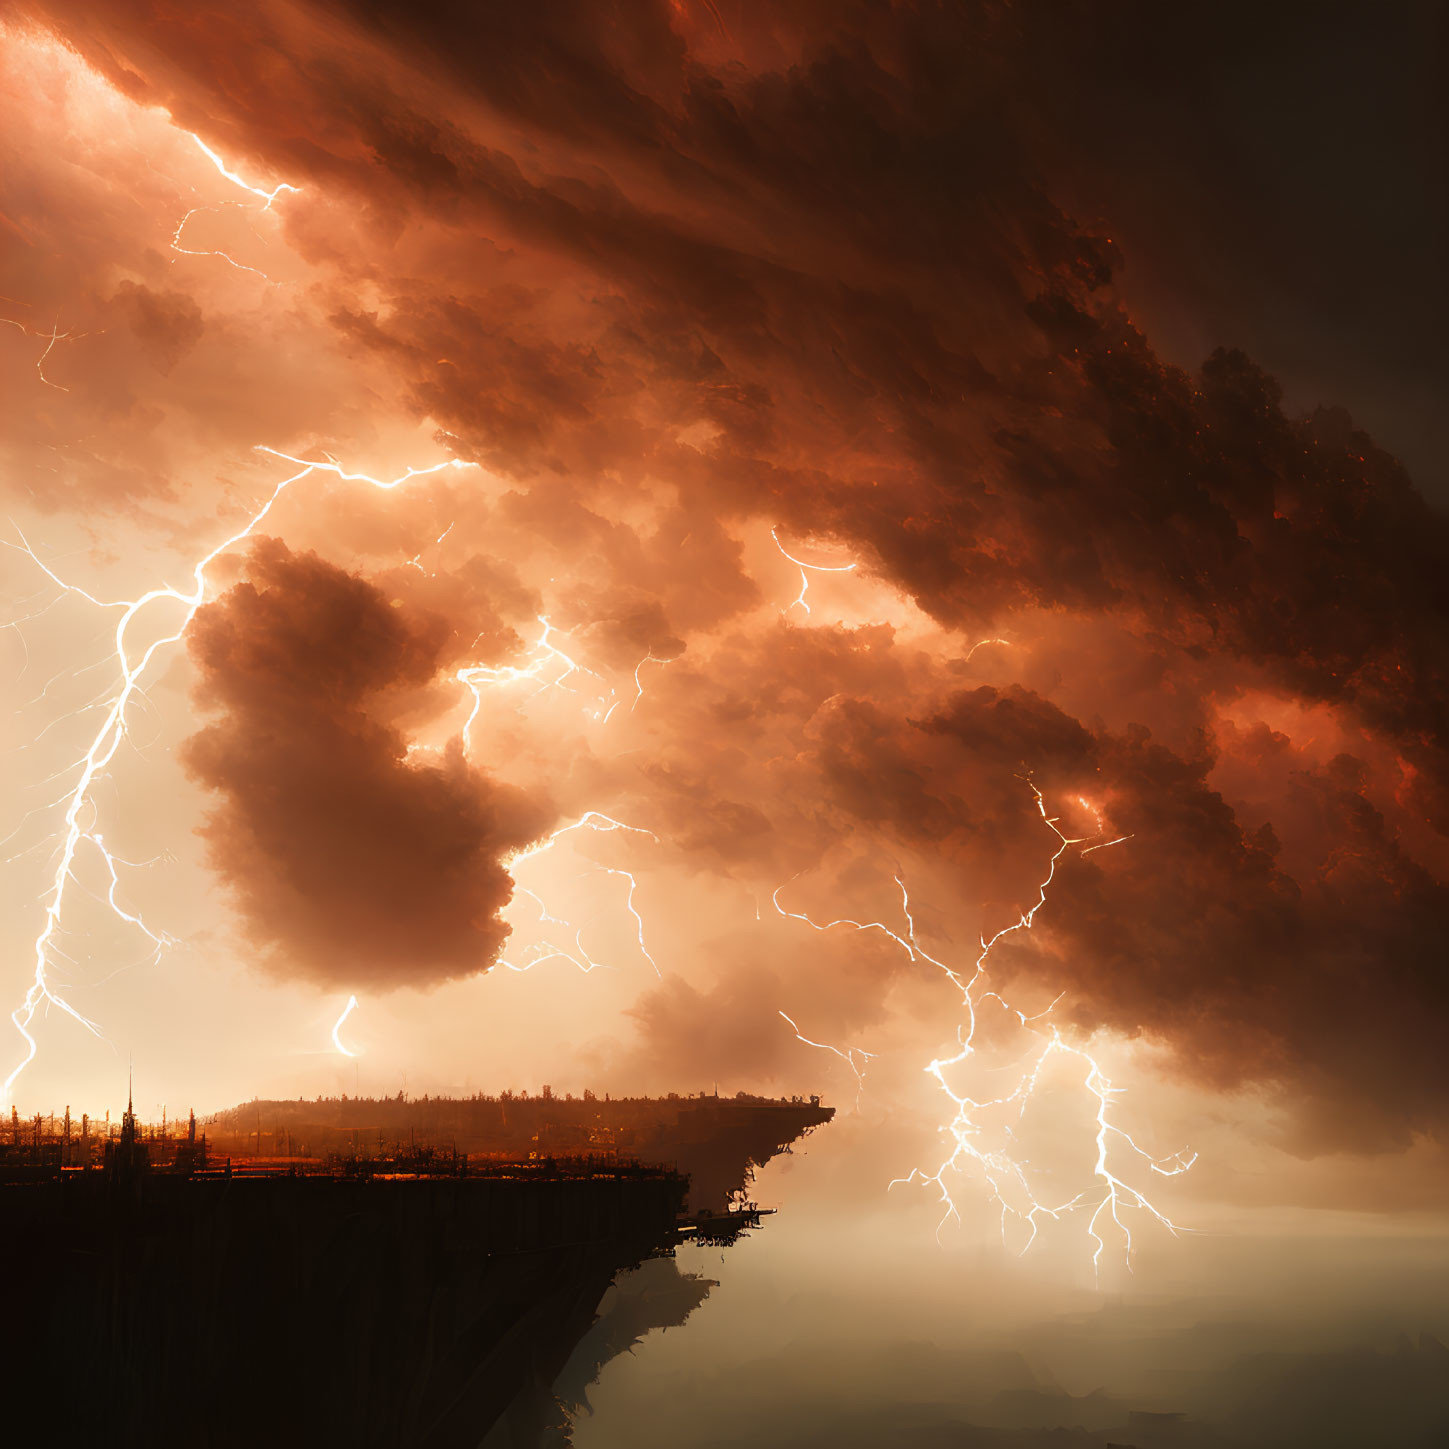 Dark storm clouds with lightning above forested cliff edge